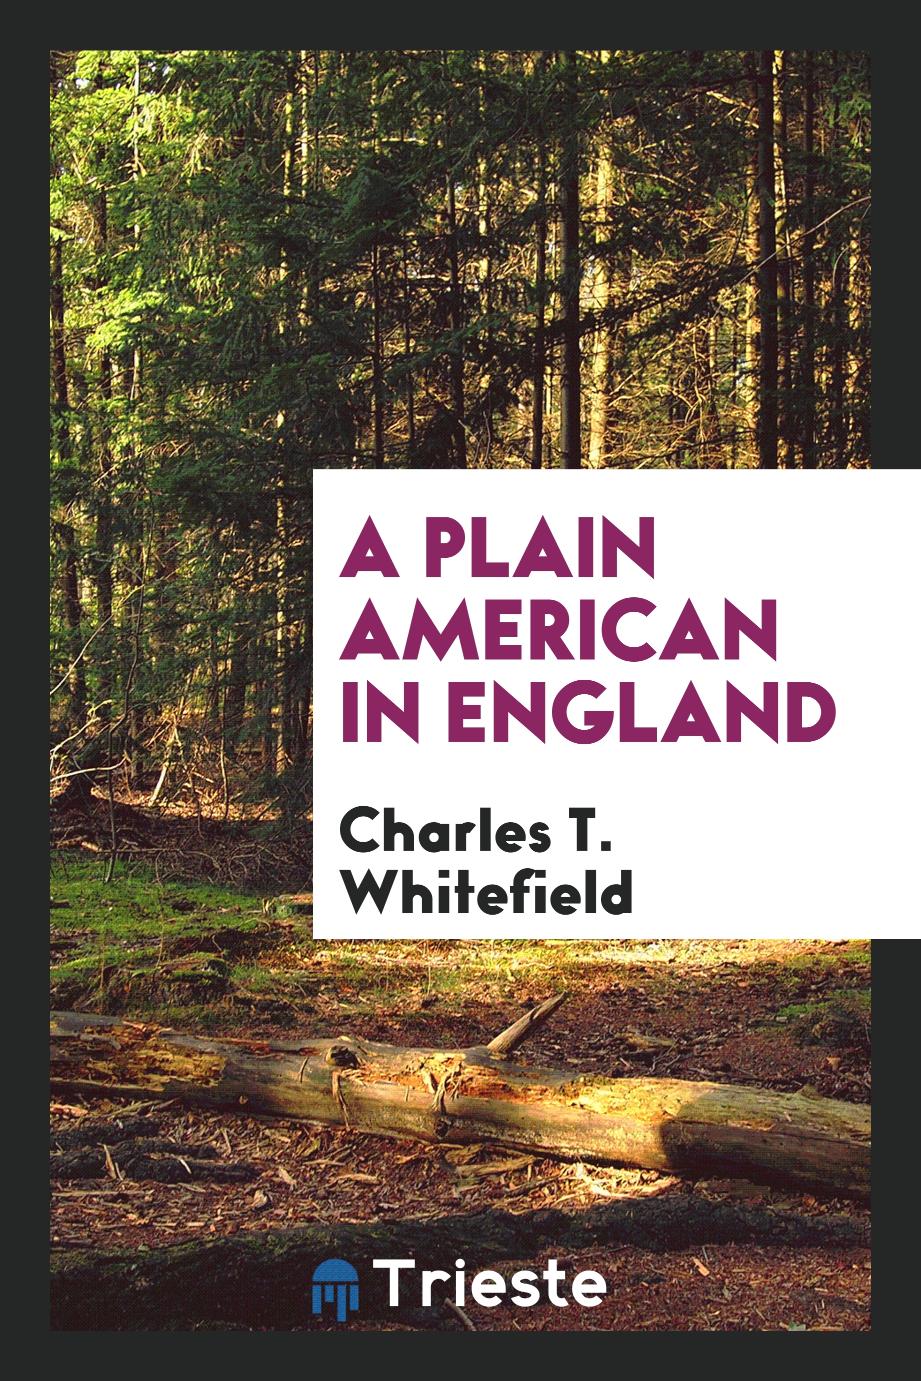 Charles T. Whitefield - A Plain American in England